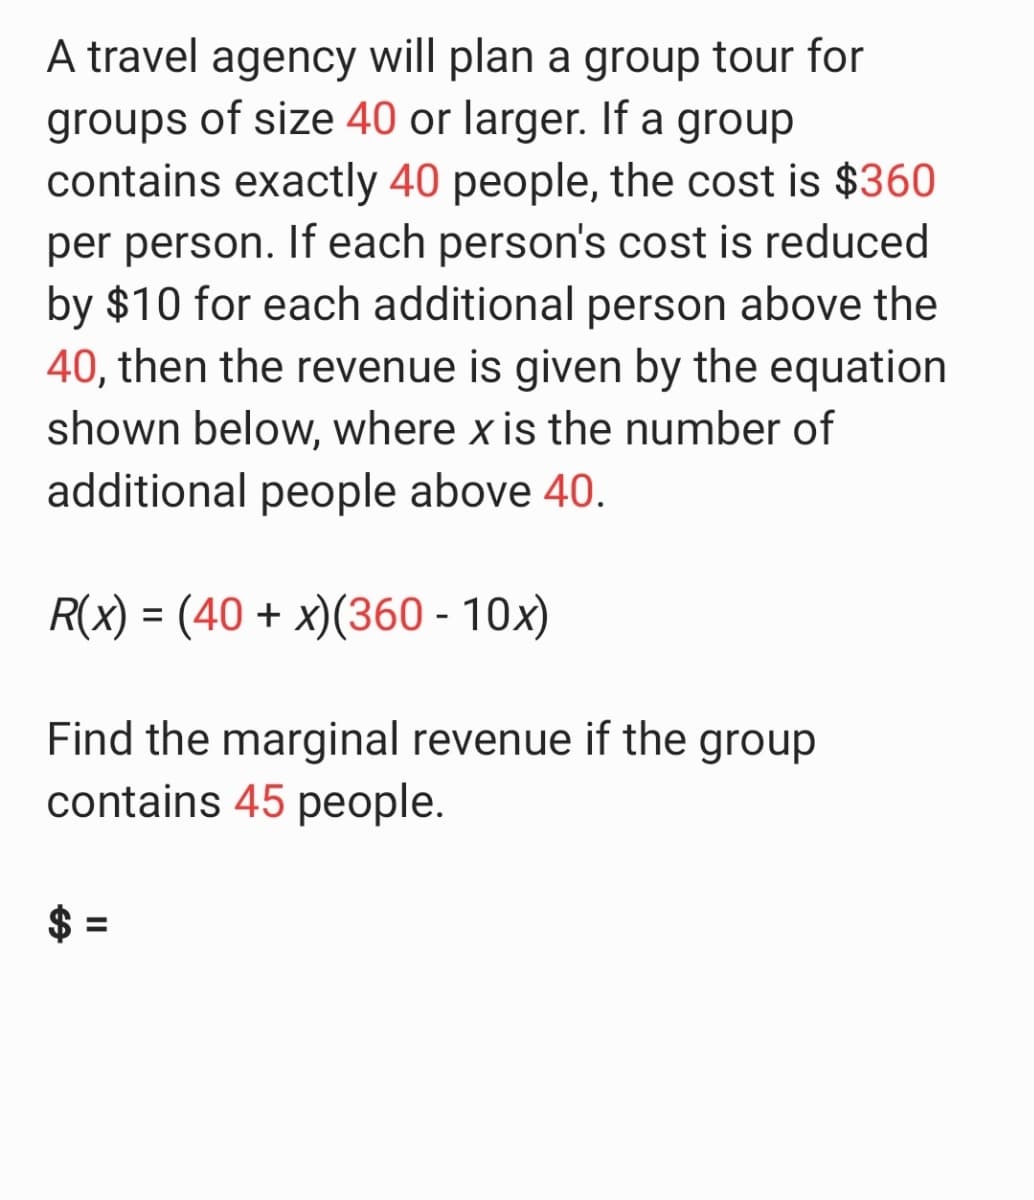 A travel agency will plan a group tour for
groups of size 40 or larger. If a group
contains exactly 40 people, the cost is $360
per person. If each person's cost is reduced
by $10 for each additional person above the
40, then the revenue is given by the equation
shown below, where x is the number of
additional people above 40.
R(x) = (40 + x)(360 - 10x)
Find the marginal revenue if the group
contains 45 people.
%24
